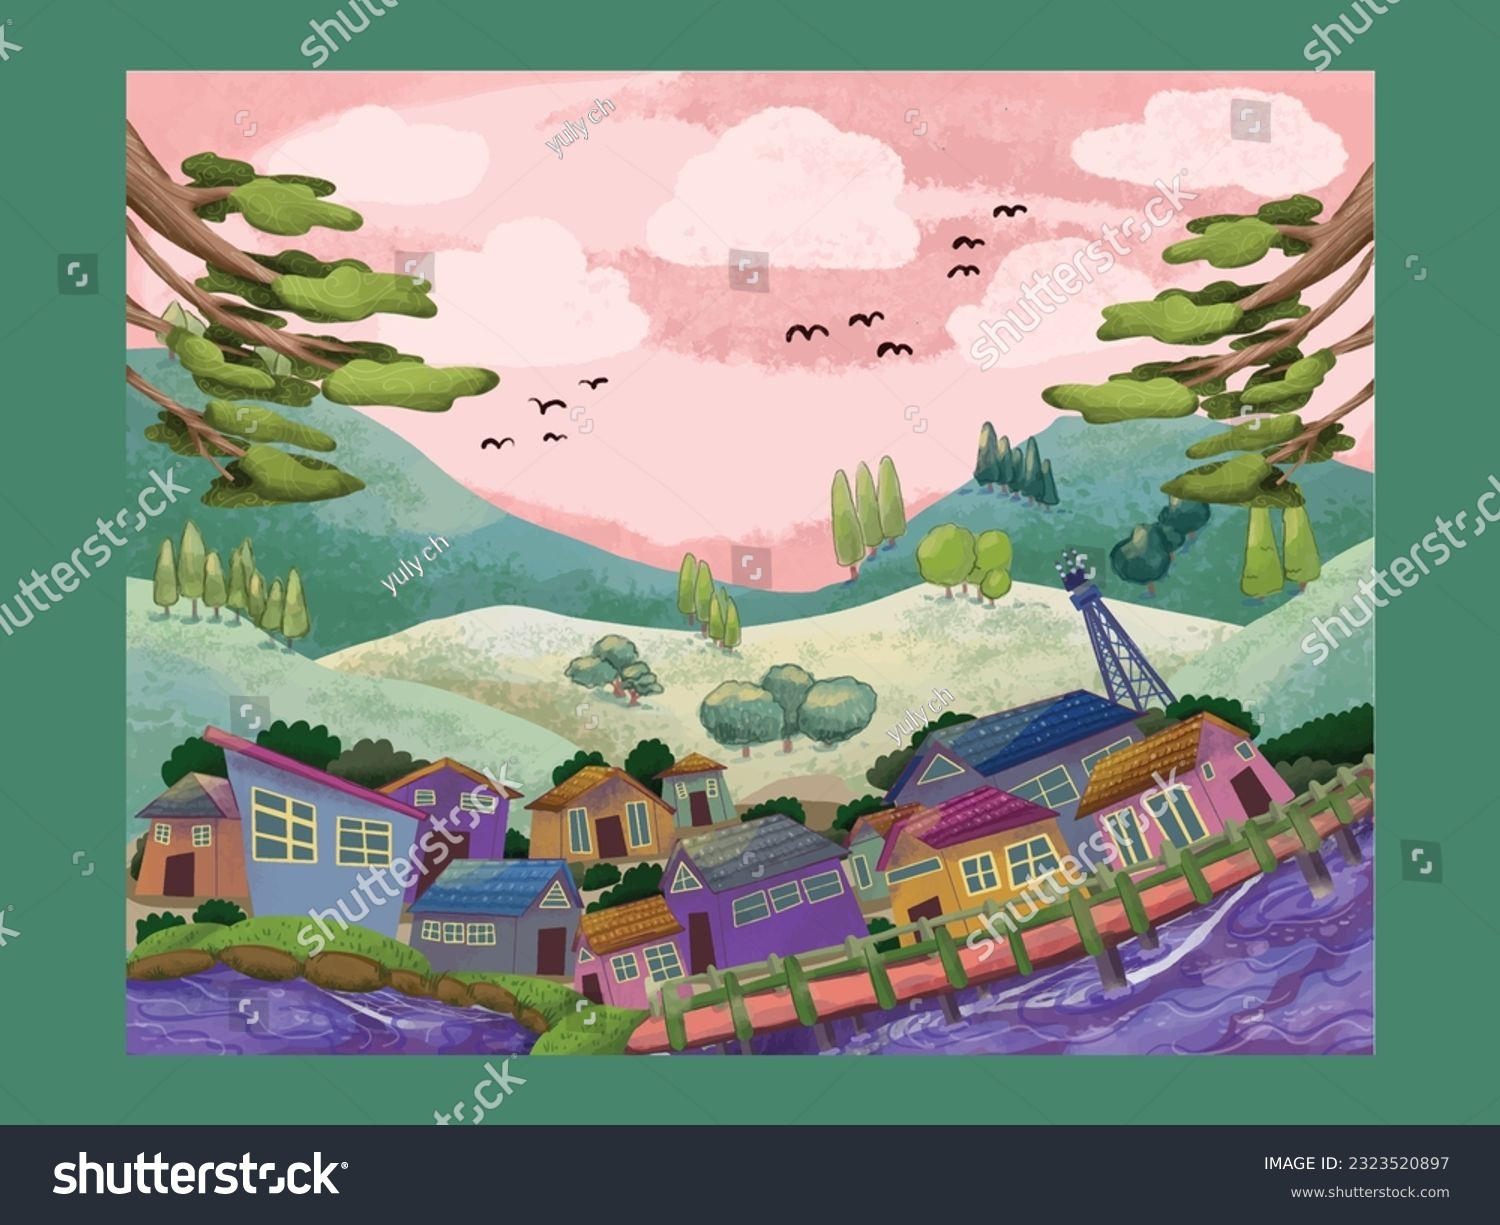 SVG of Aceh Indonesia, Desa Bintang colorful illustration , small beautiful village in Aceh Indonesia  svg